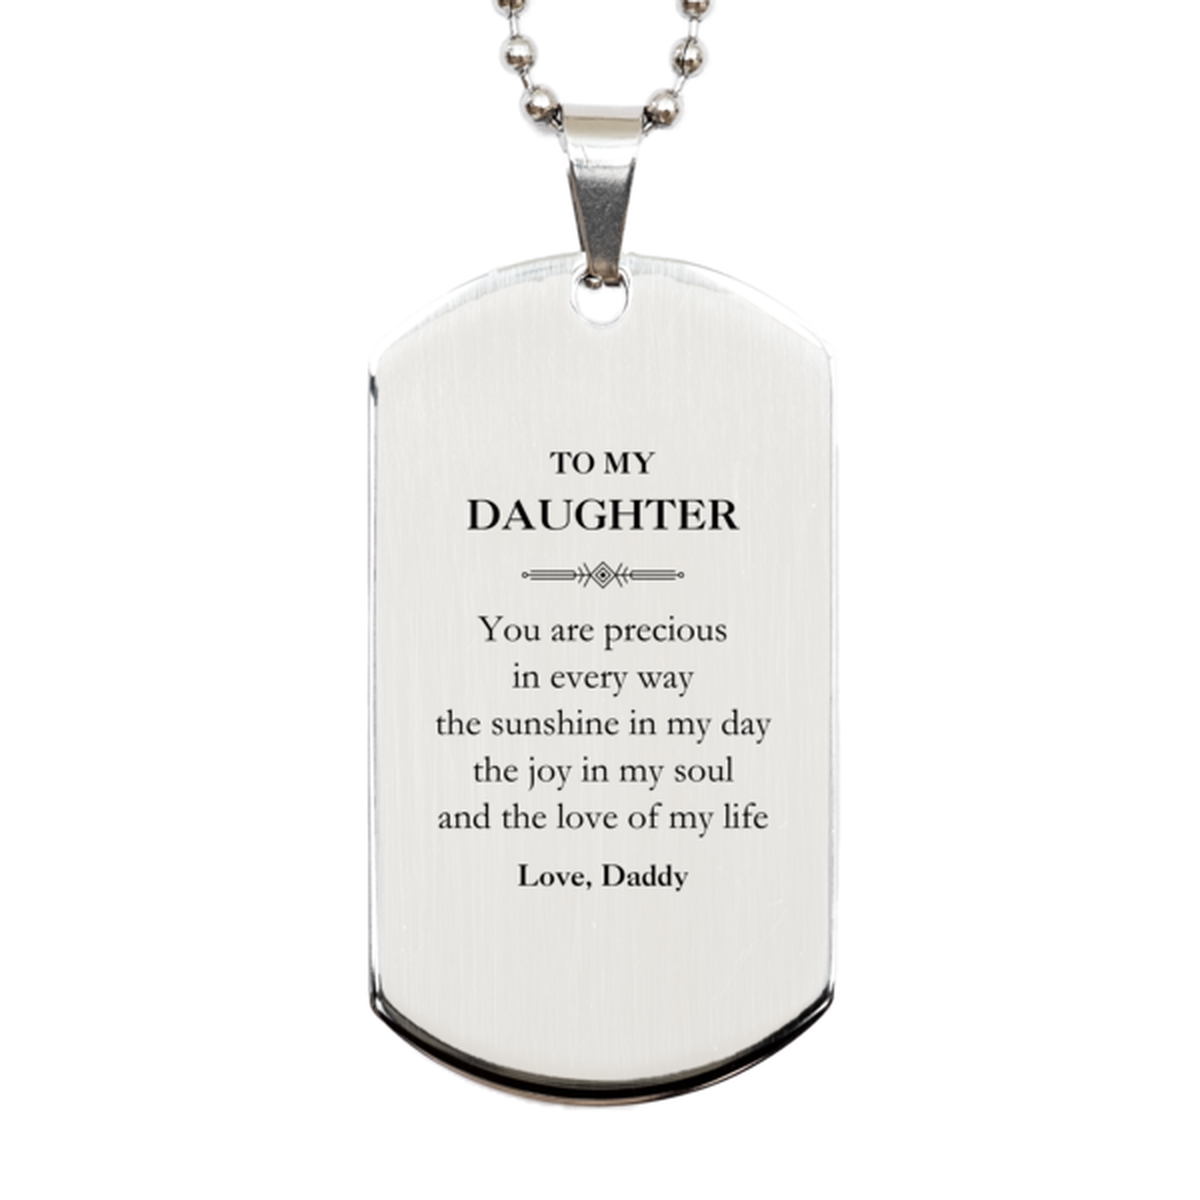 Graduation Gifts for Daughter Silver Dog Tag Present from Daddy, Christmas Daughter Birthday Gifts Daughter You are precious in every way the sunshine in my day. Love, Daddy